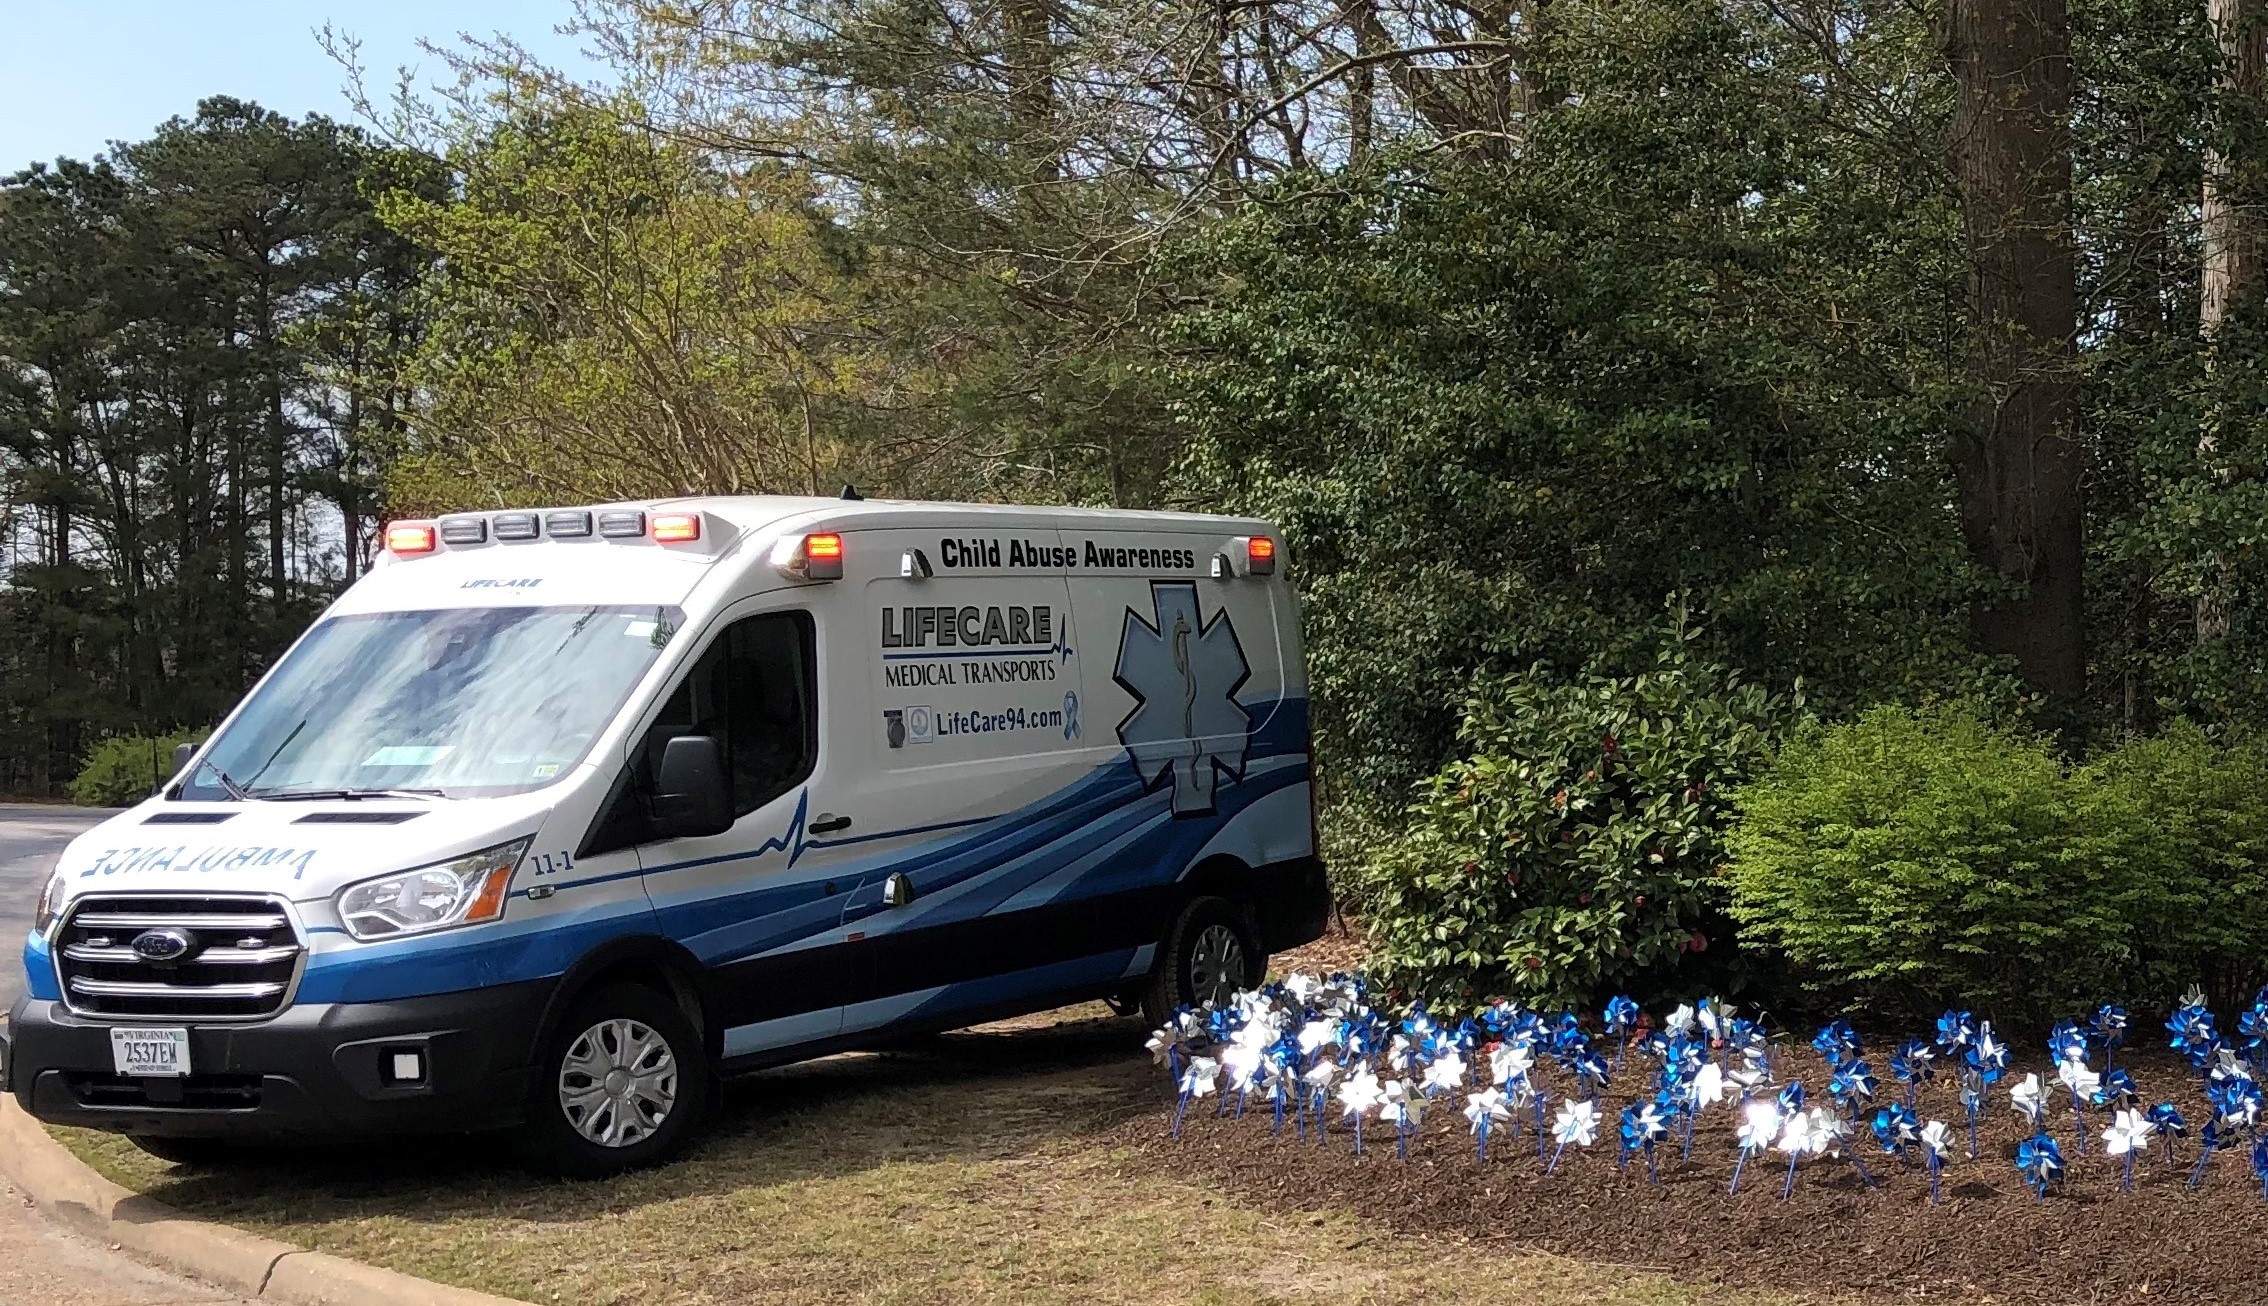 Featured image for “LifeCare Medical Transports Hosts Child Abuse Awareness Event April 15”